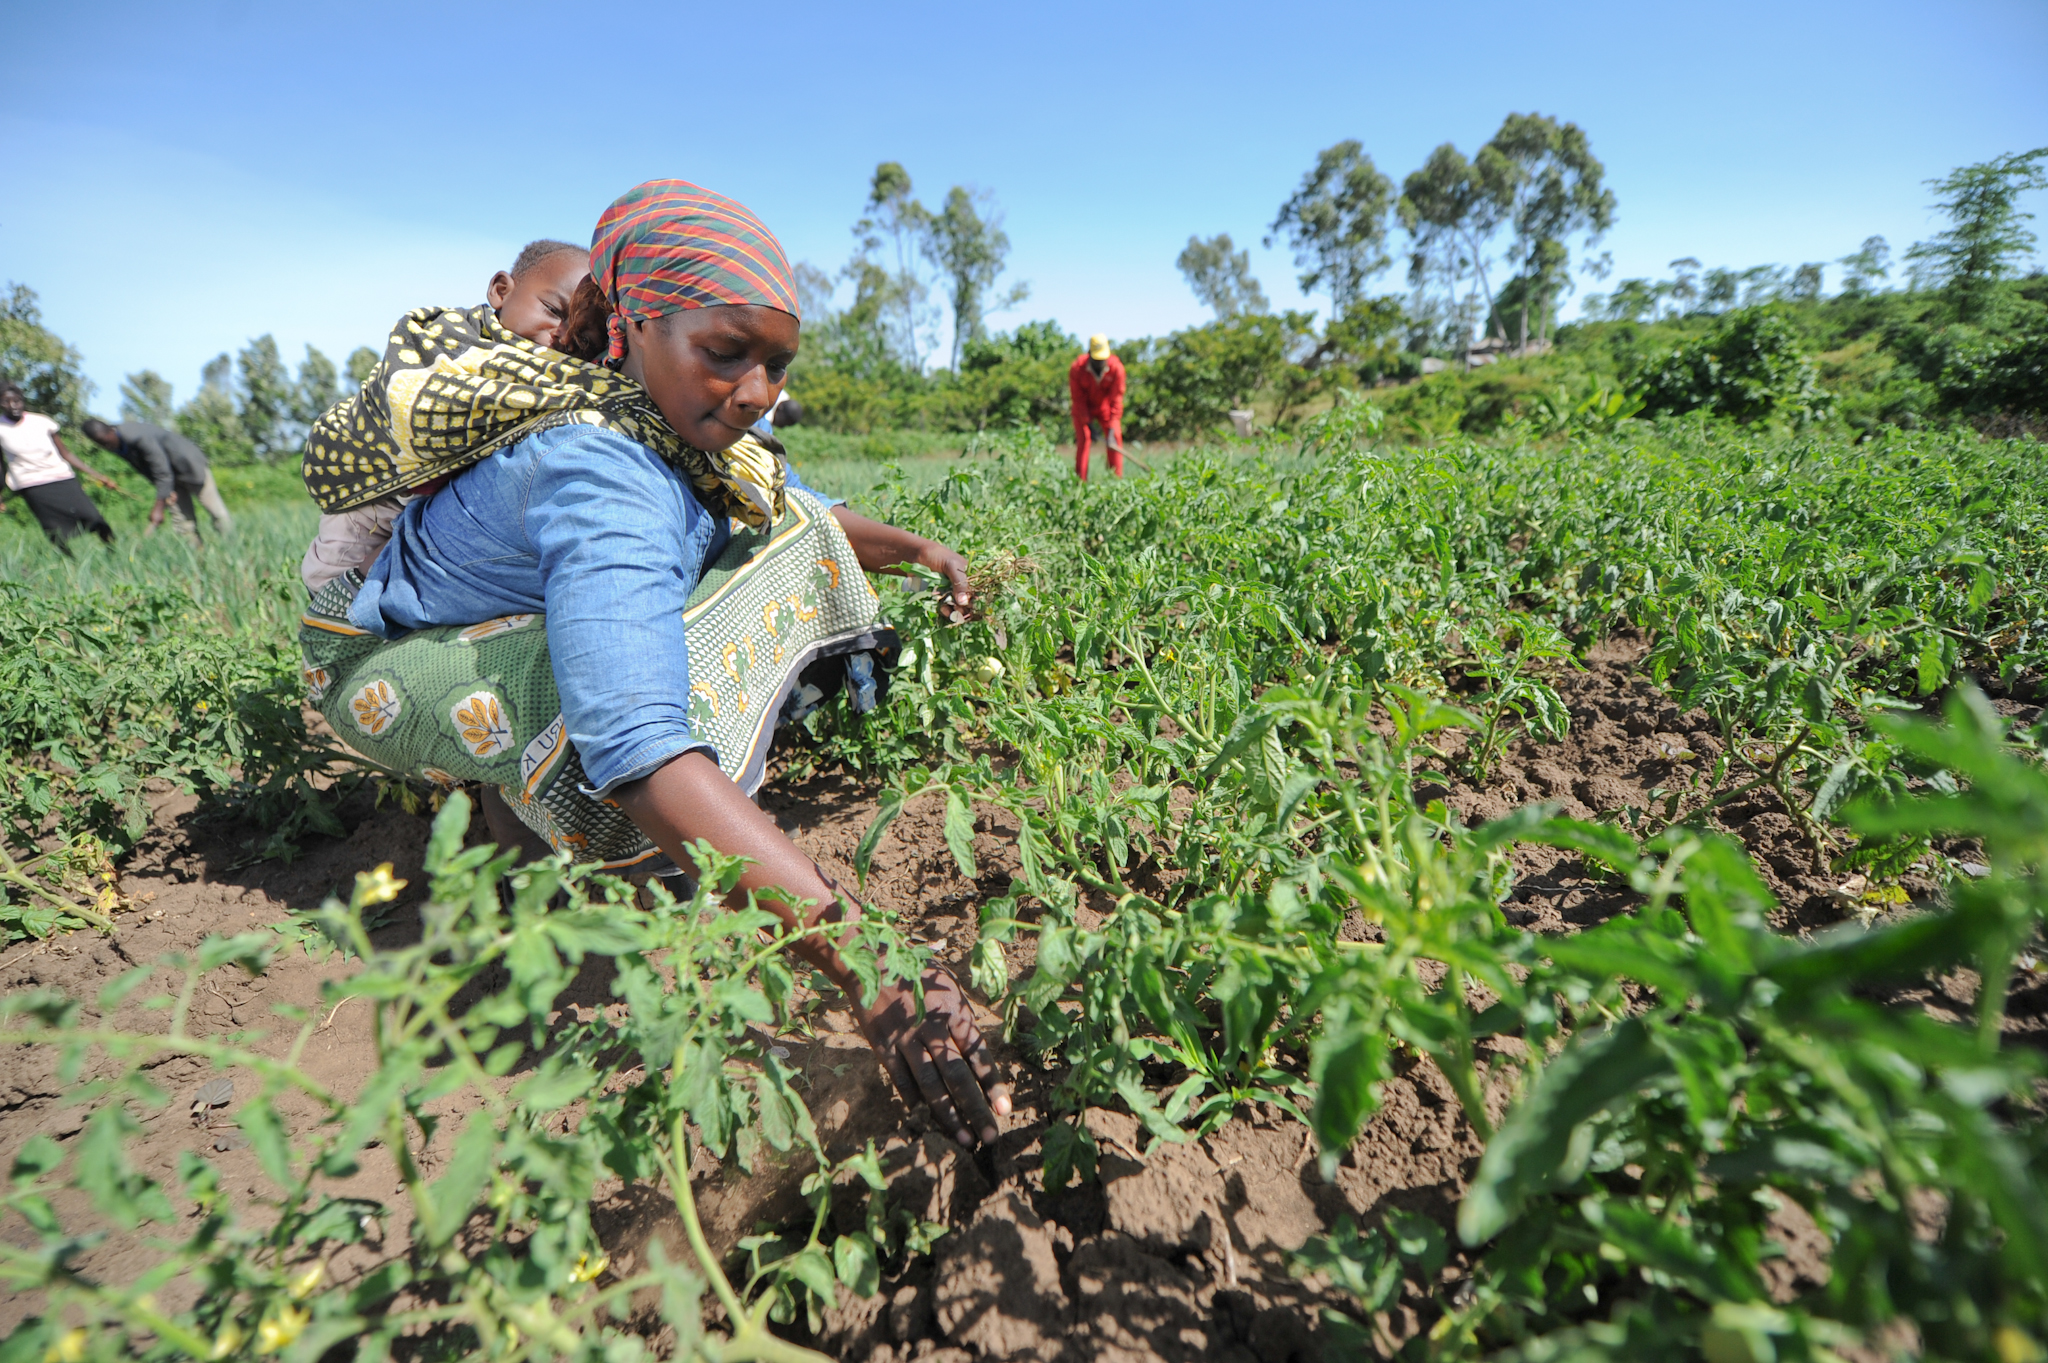 Dialogues on How to Make Africa Grow - Agriculture